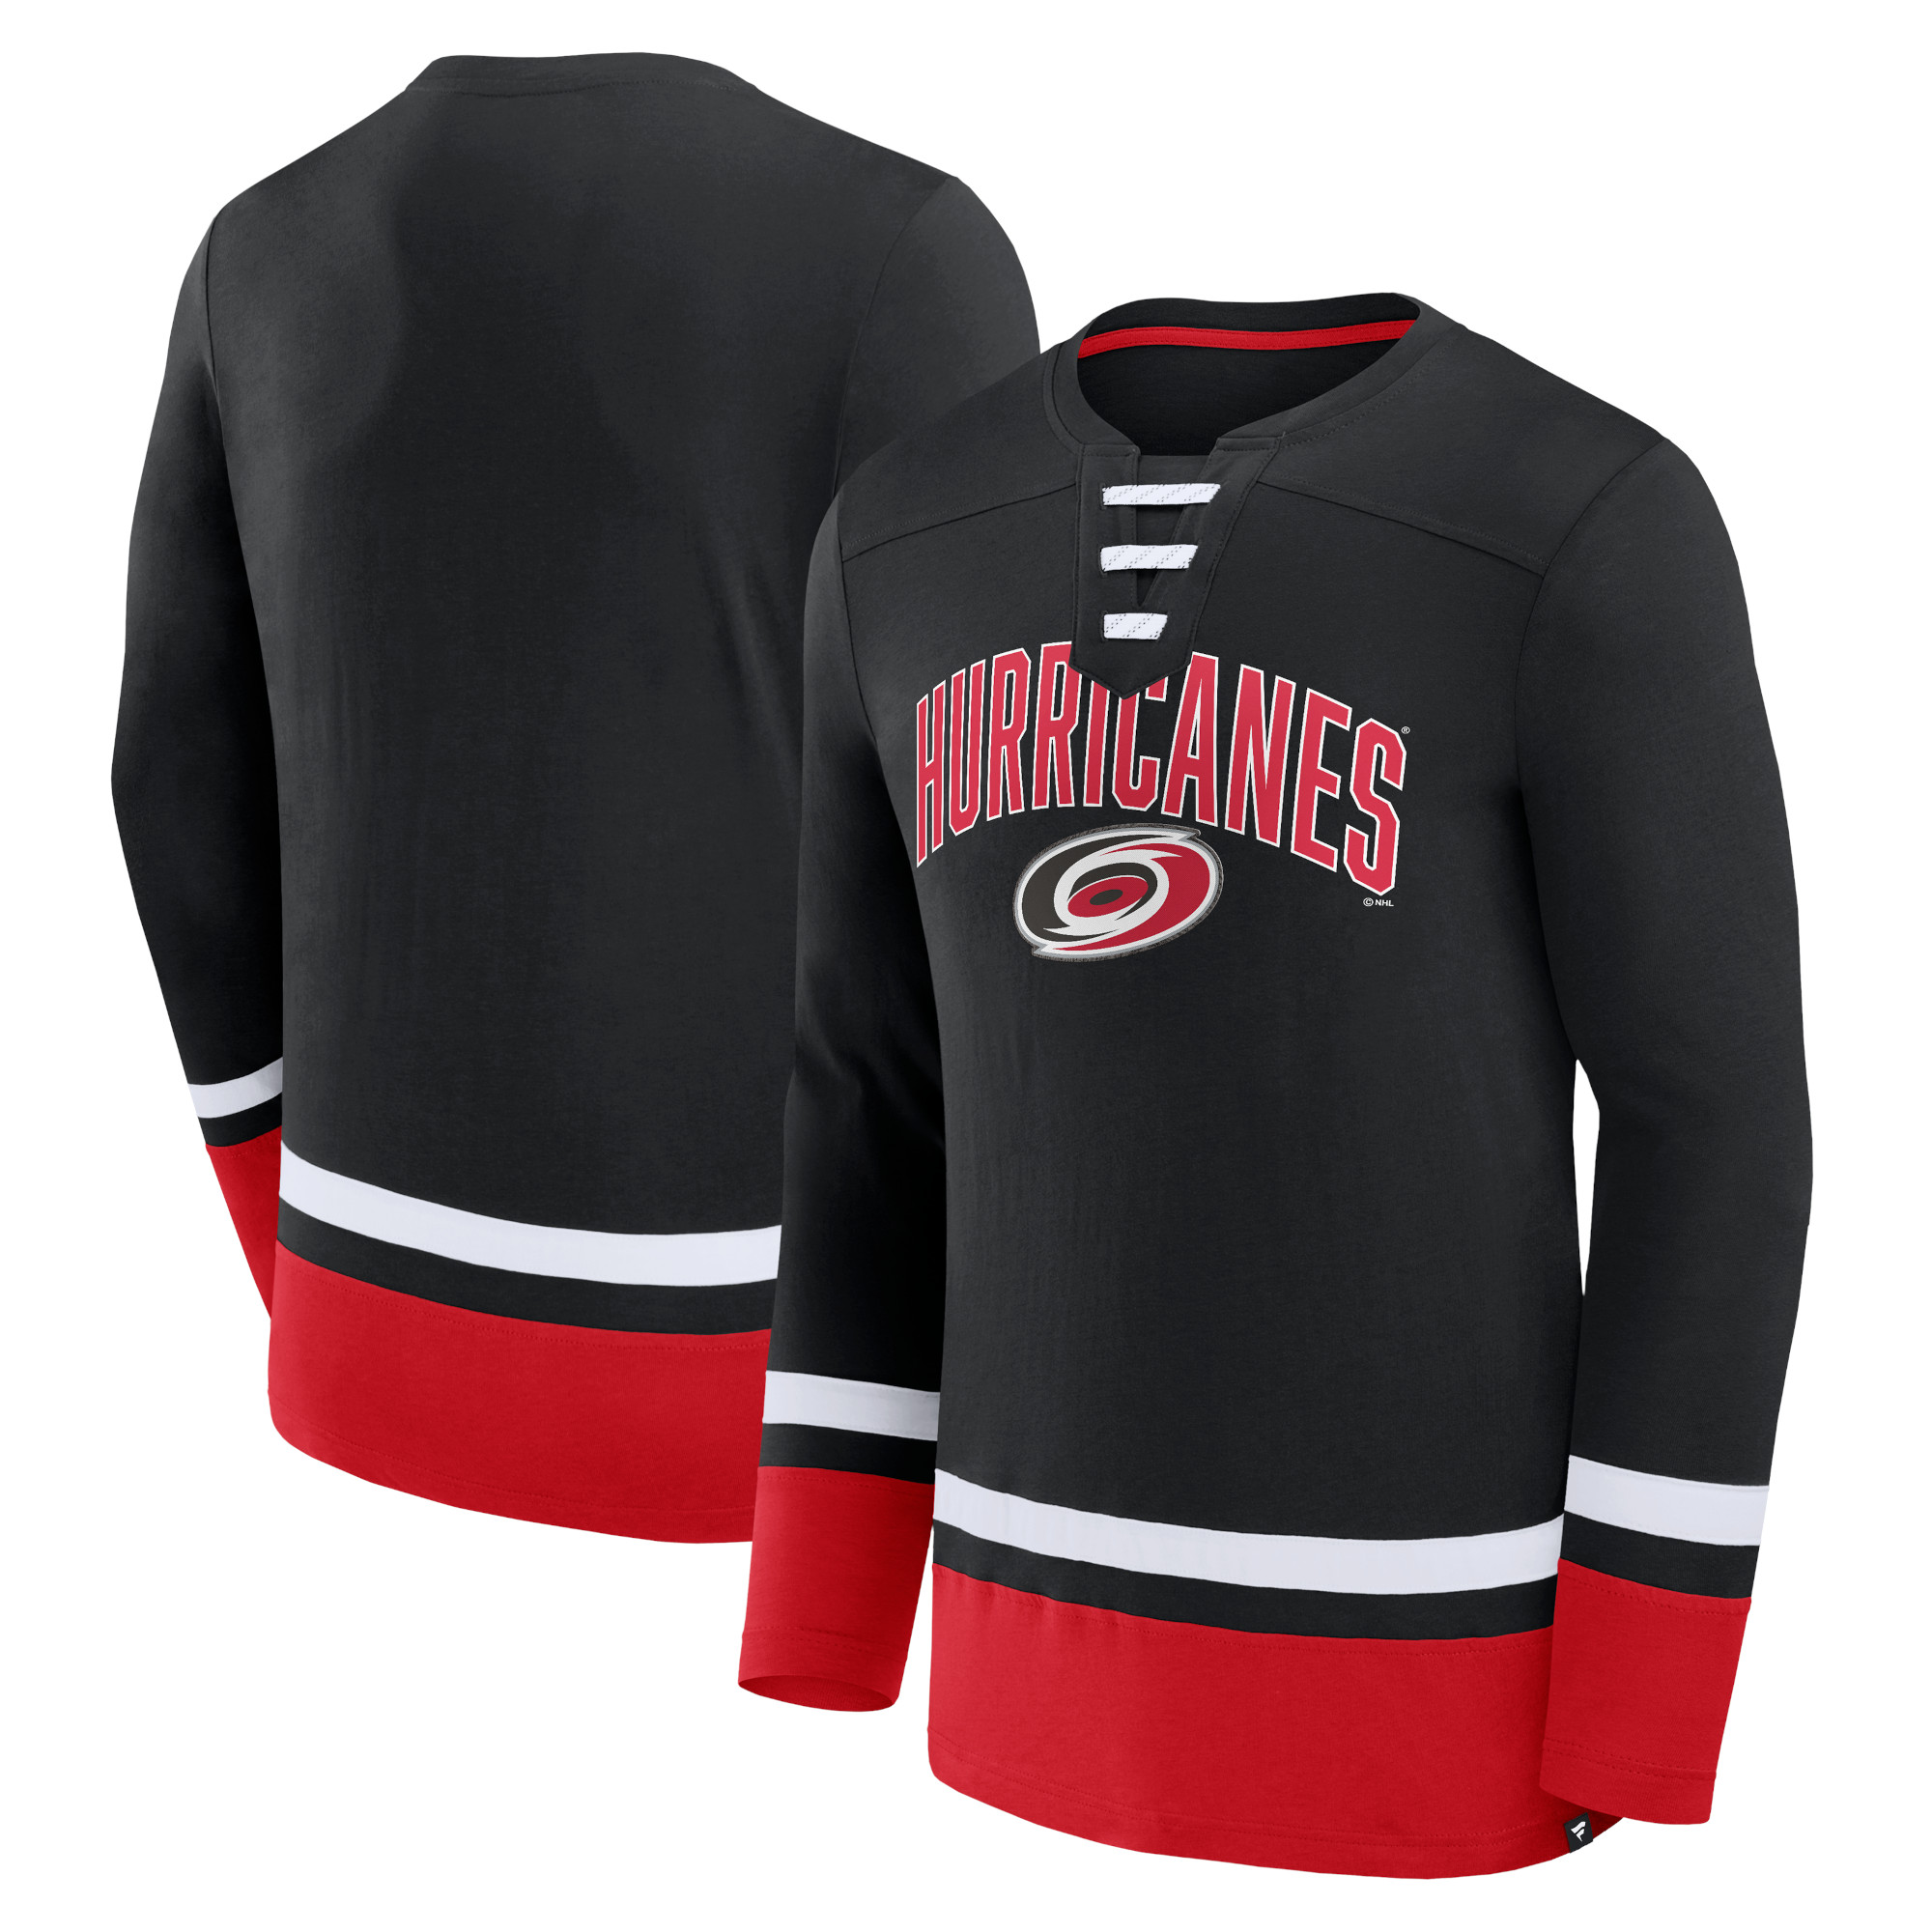 Best Carolina Hurricanes Gifts Show Your Support for the Team and Fight Against Cancer